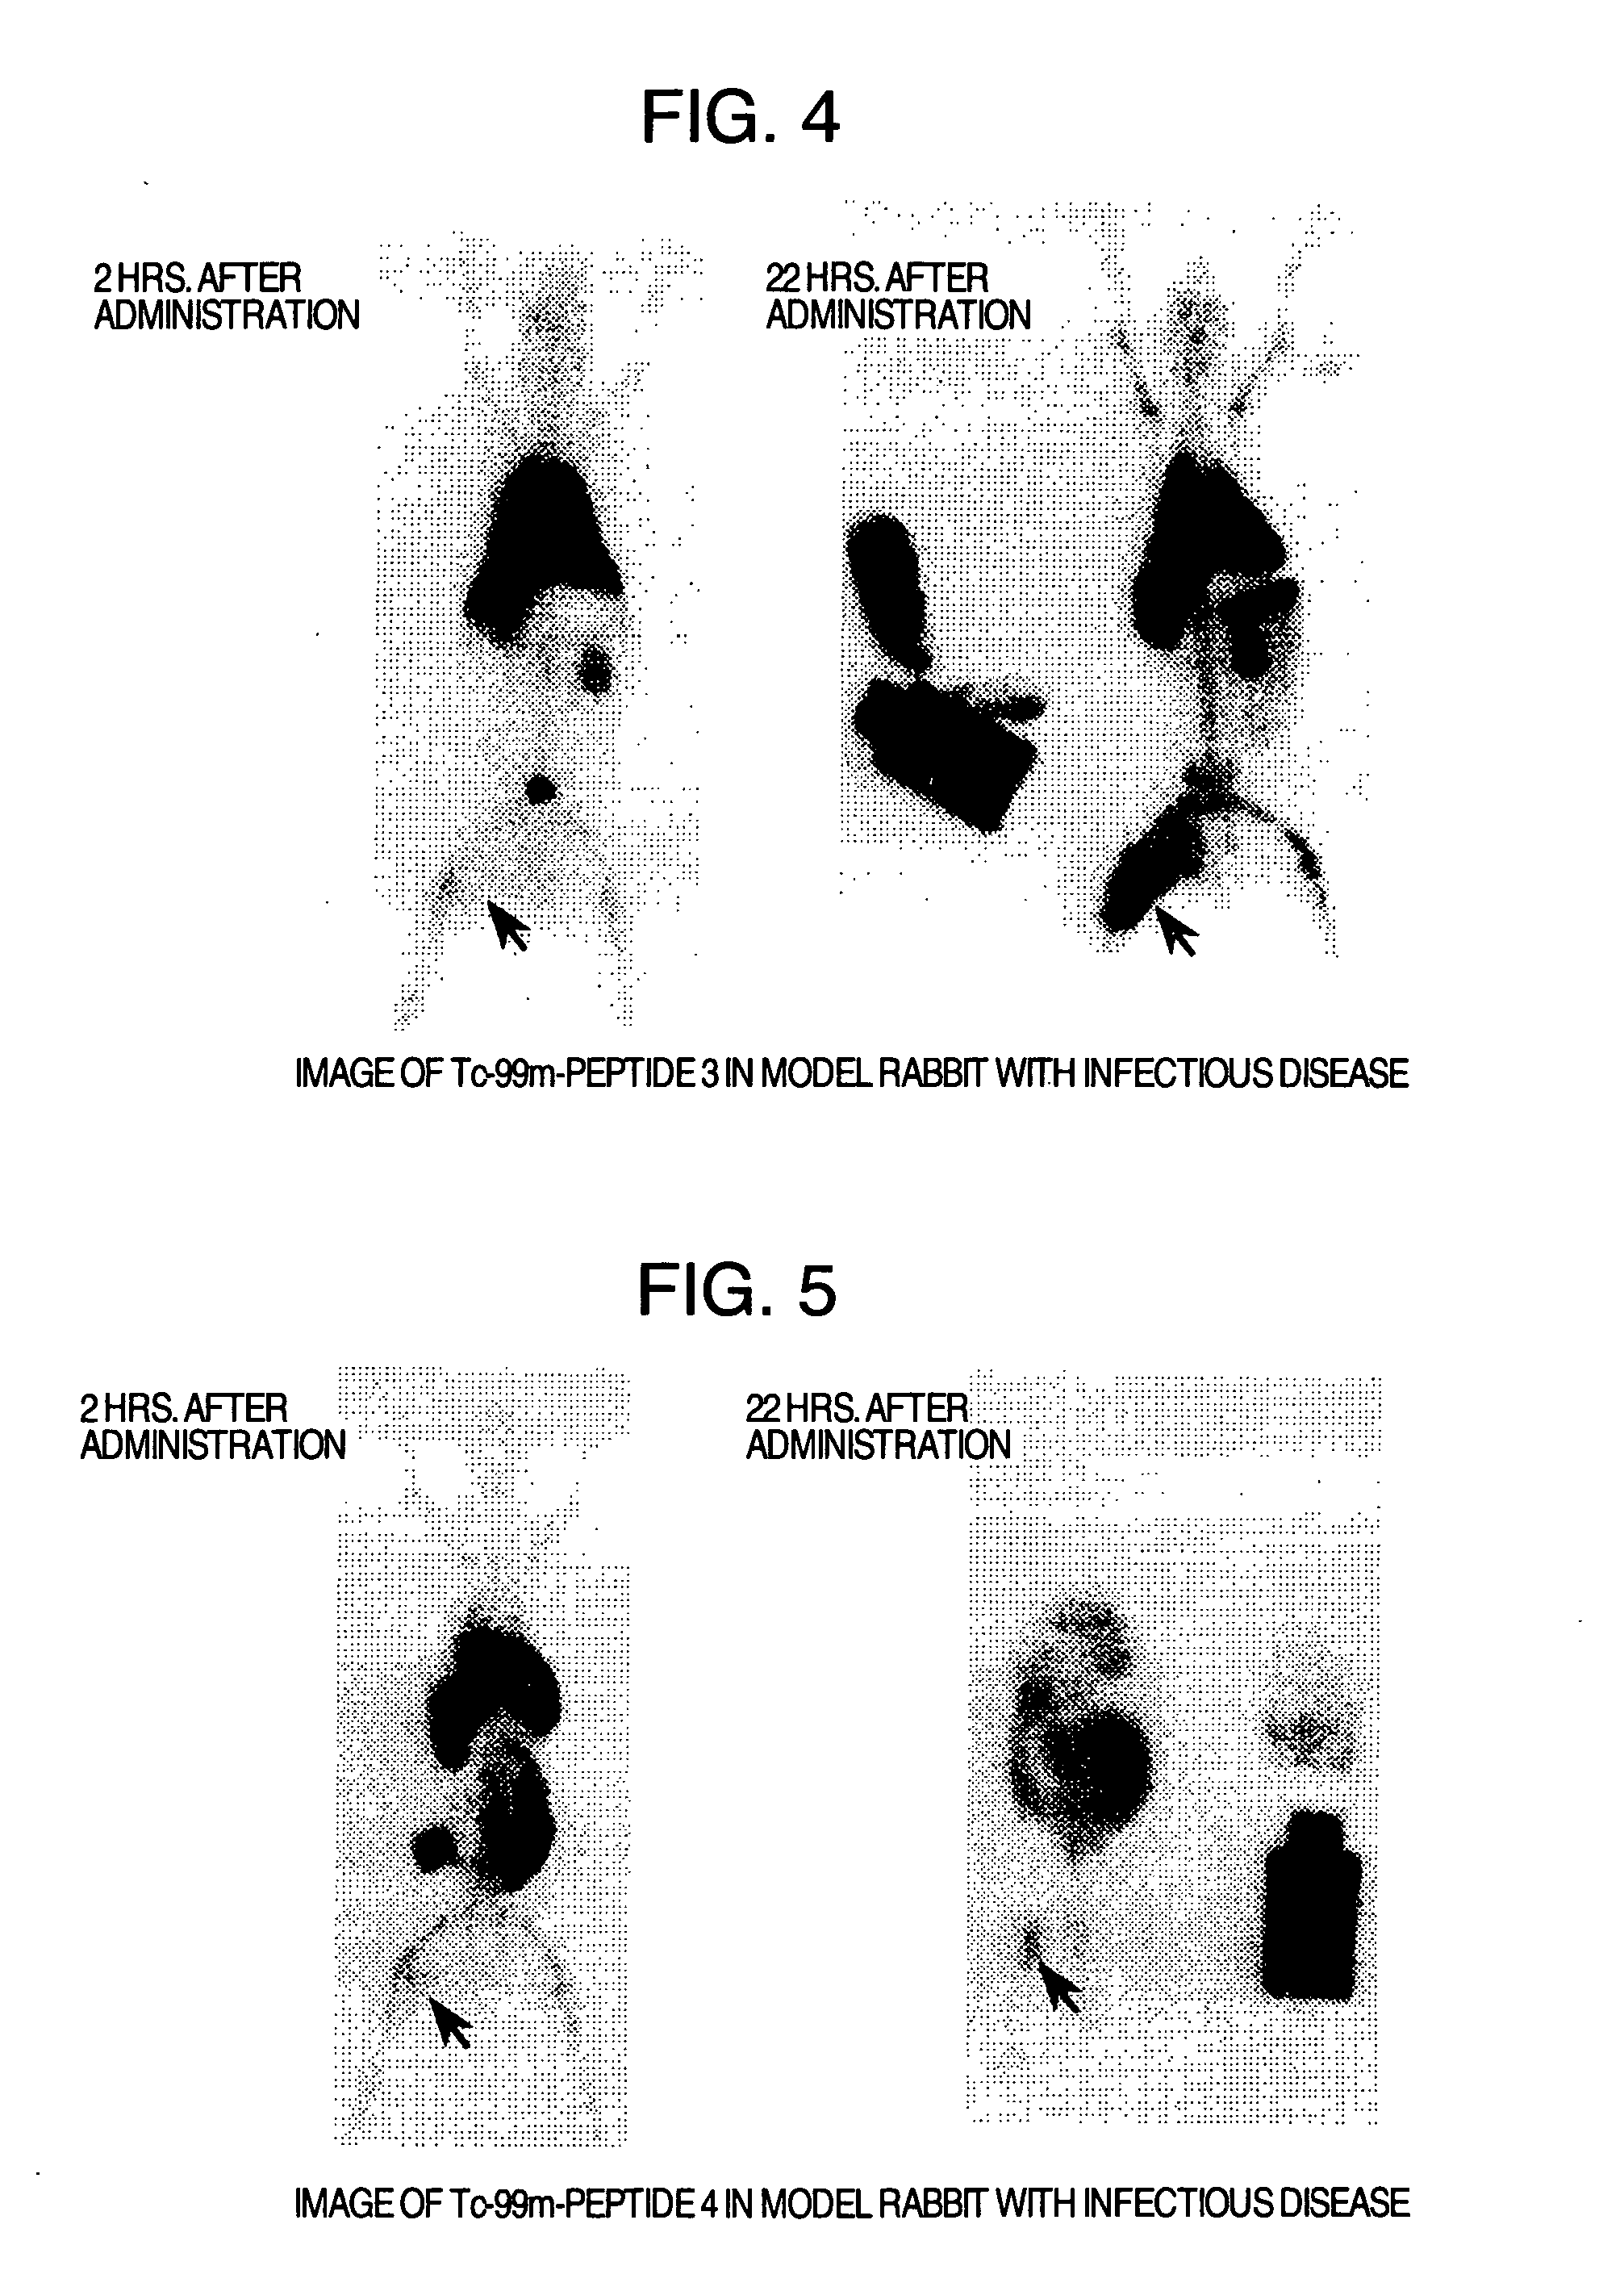 Compound binding to leukocytes and medicinal composition containing the compound in labeled state as the active ingredient